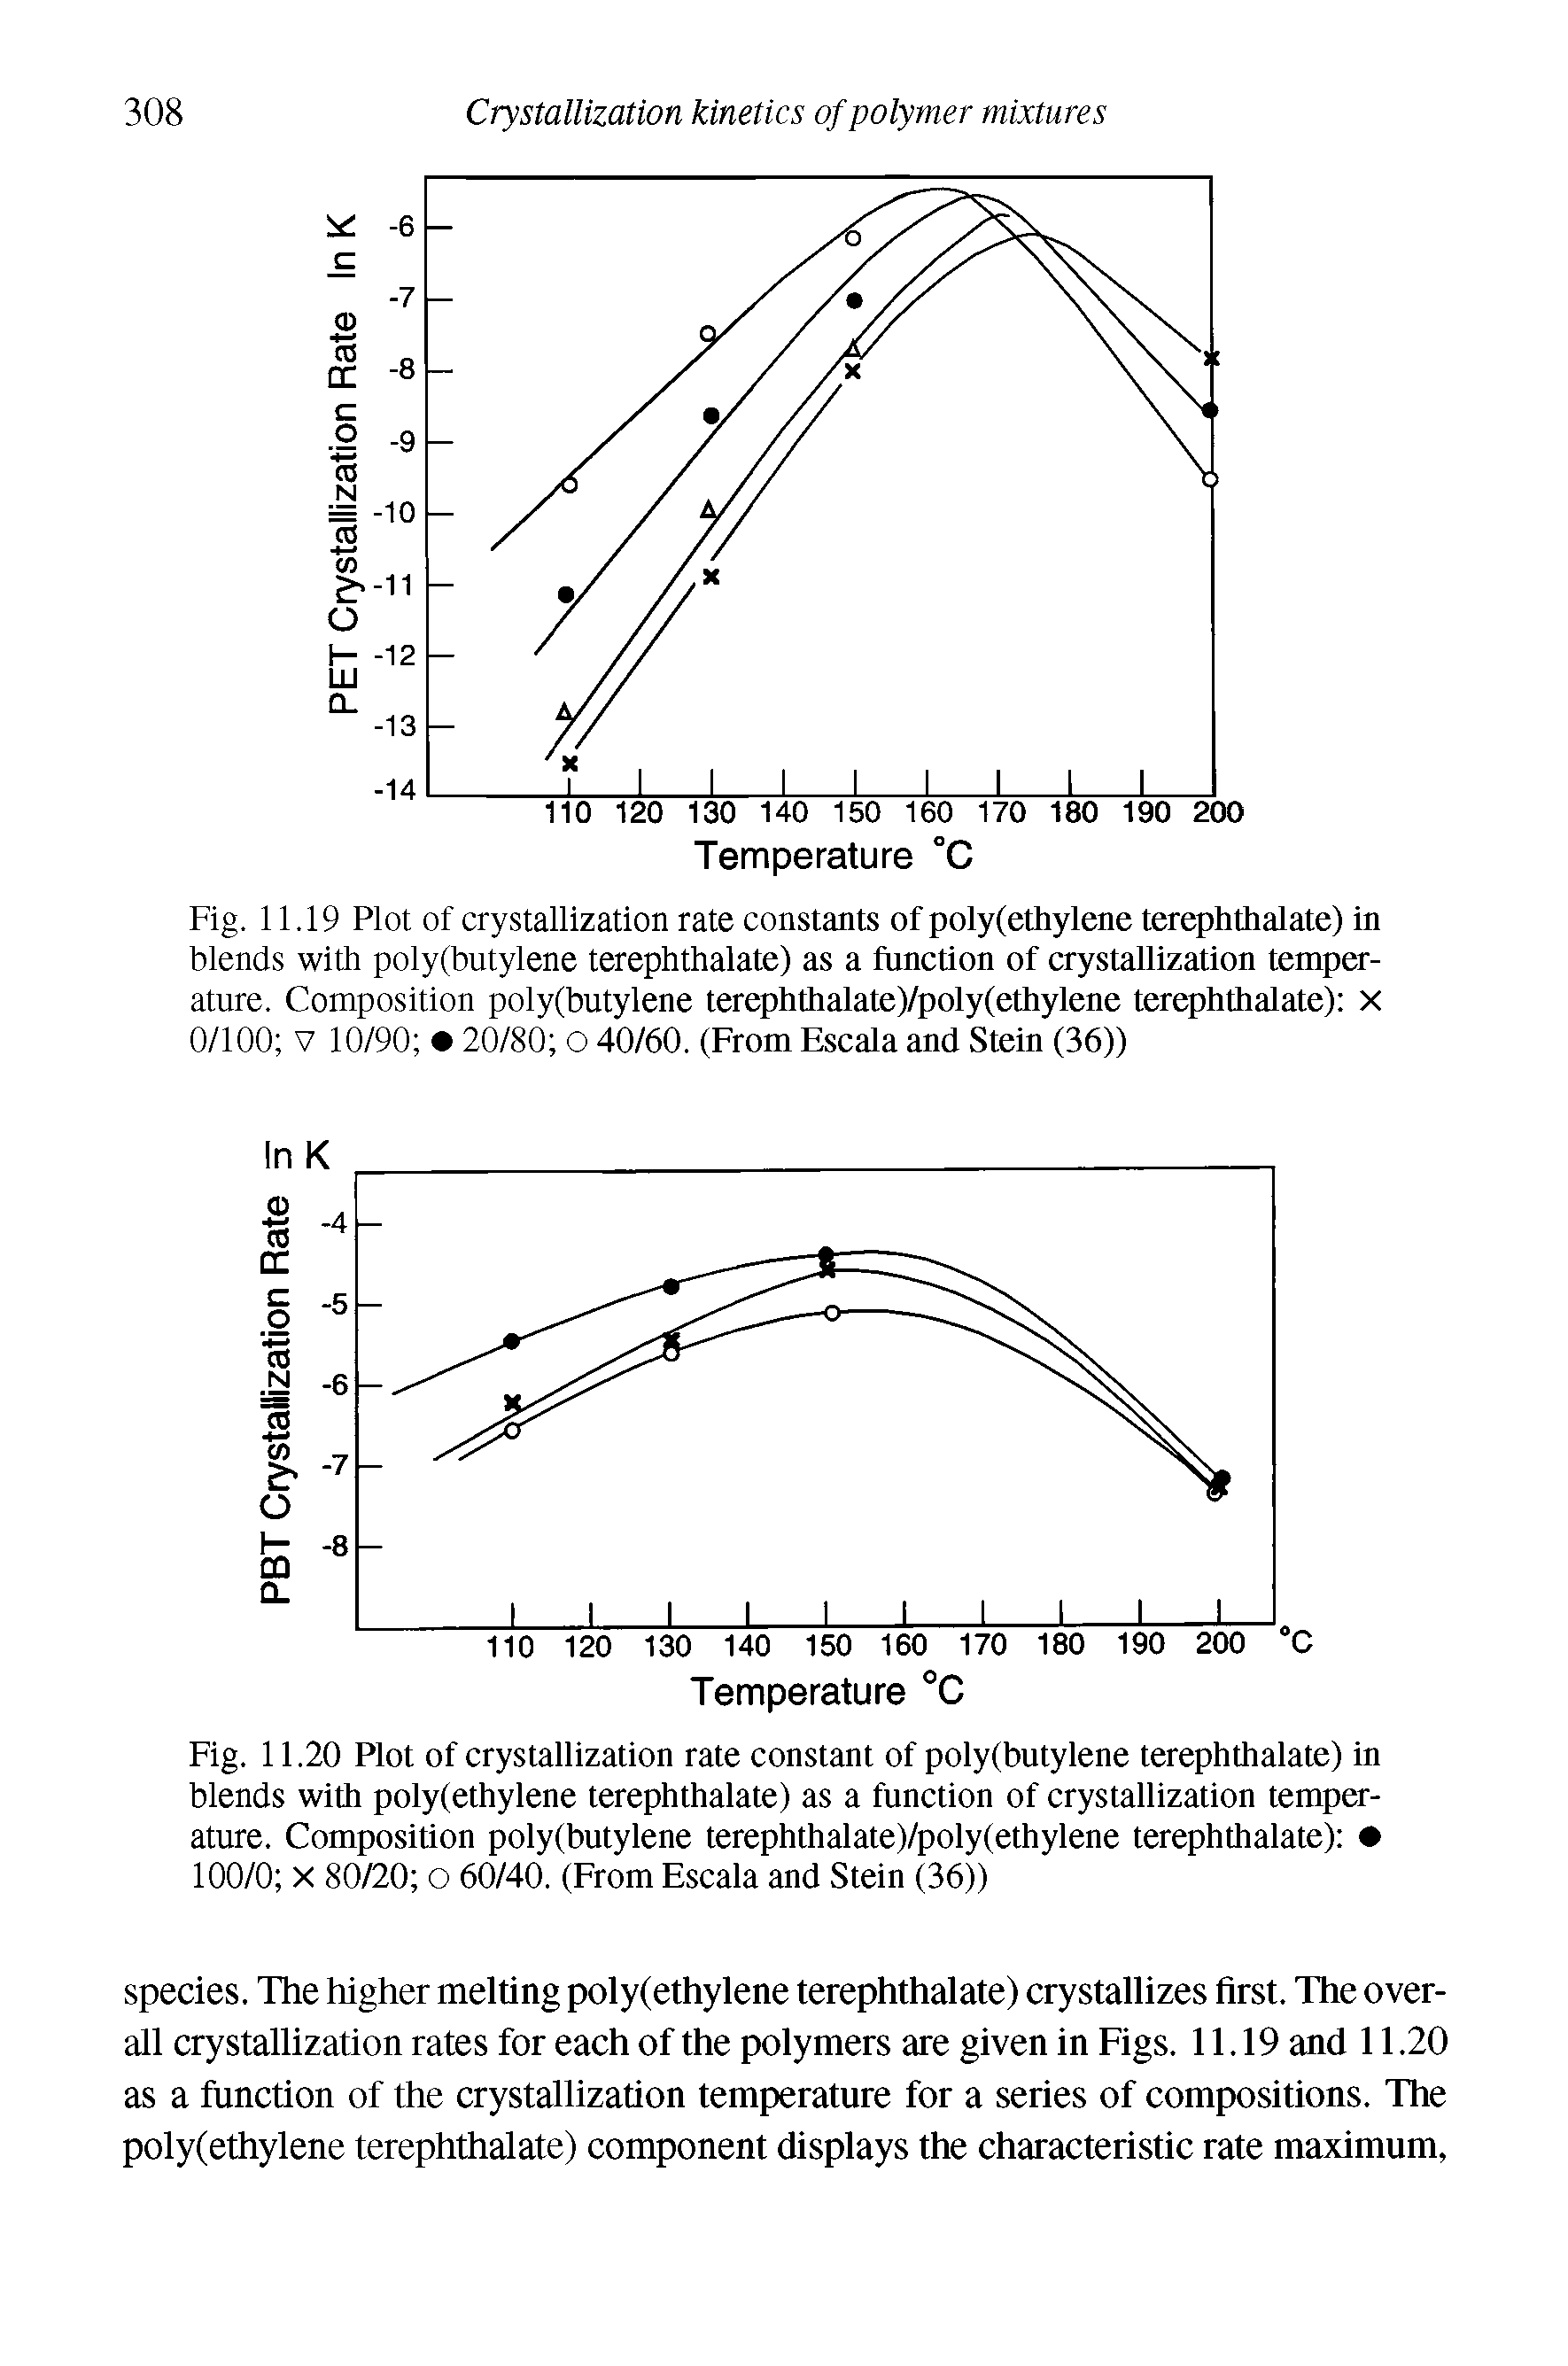 Fig. 11.19 Plot of crystallization rate constants of poly(ethylene terephthalate) in blends with poly(butylene terephthalate) as a function of crystallization temperature. Composition poly(butylene terephthalate)/poly(ethylene terephthalate) X 0/100 V 10/90 20/80 O 40/60. (From Elscala and Stein (36))...